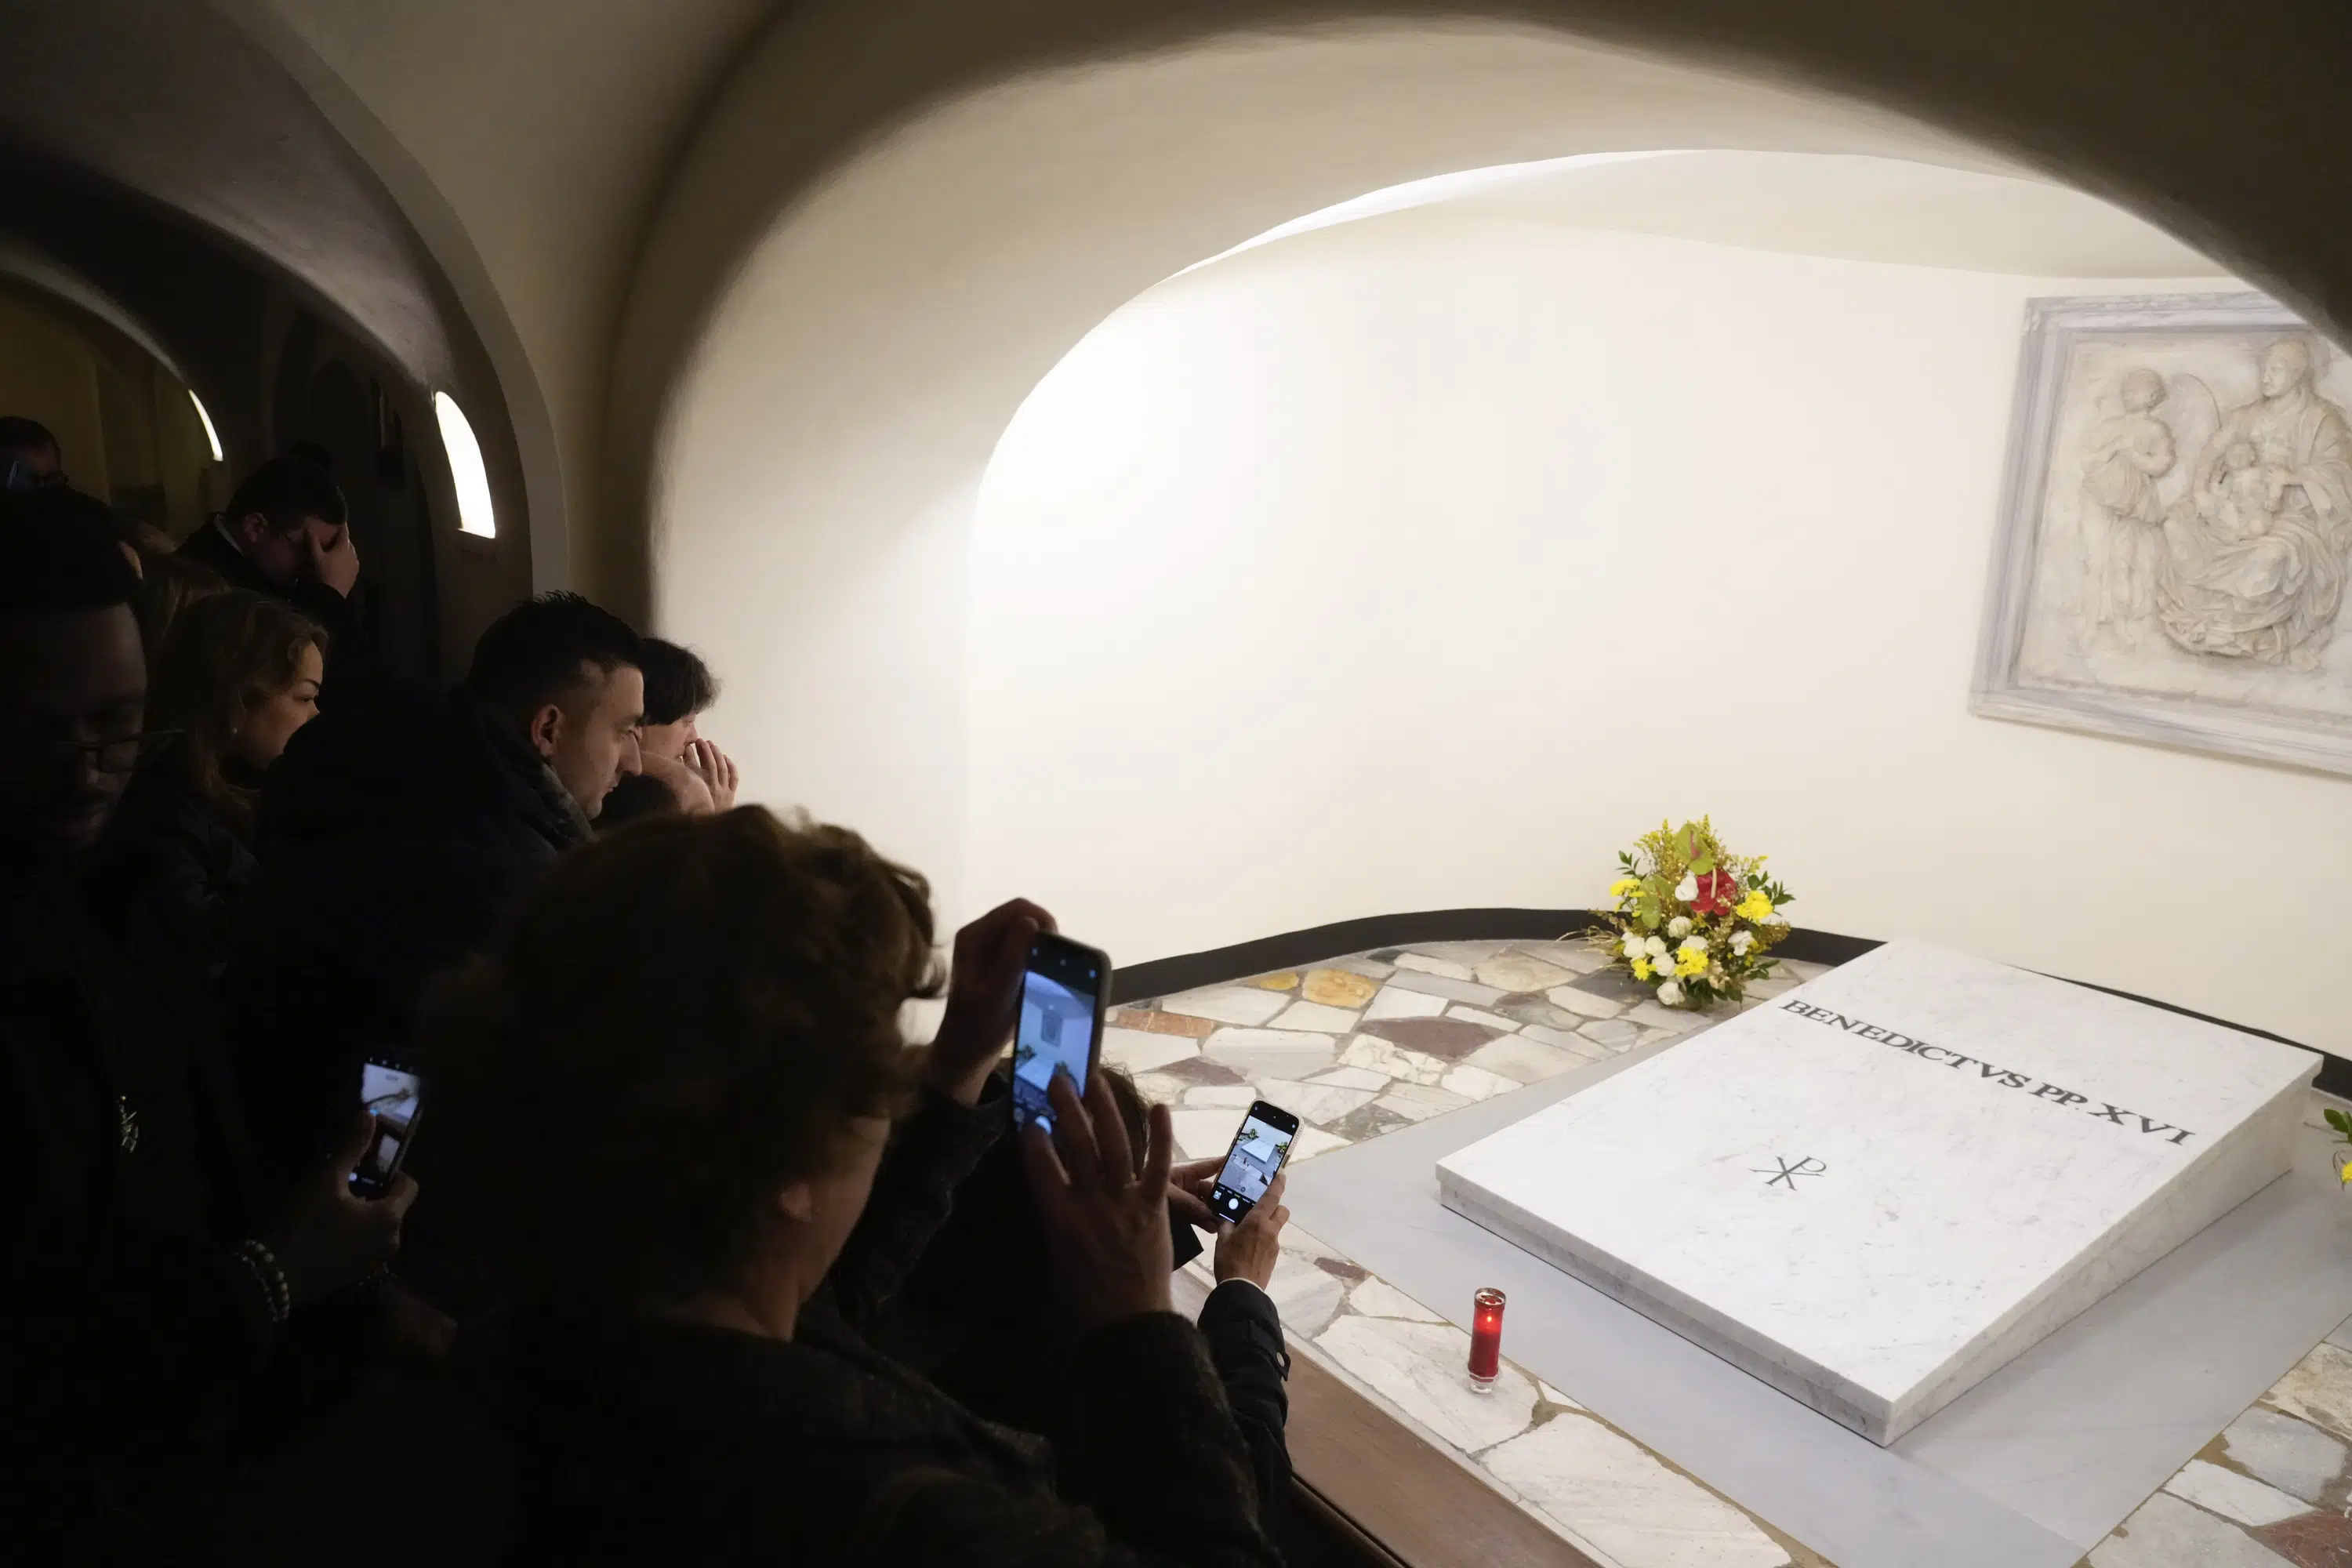 Public now can see Benedict's tomb at St. Peter's Basilica